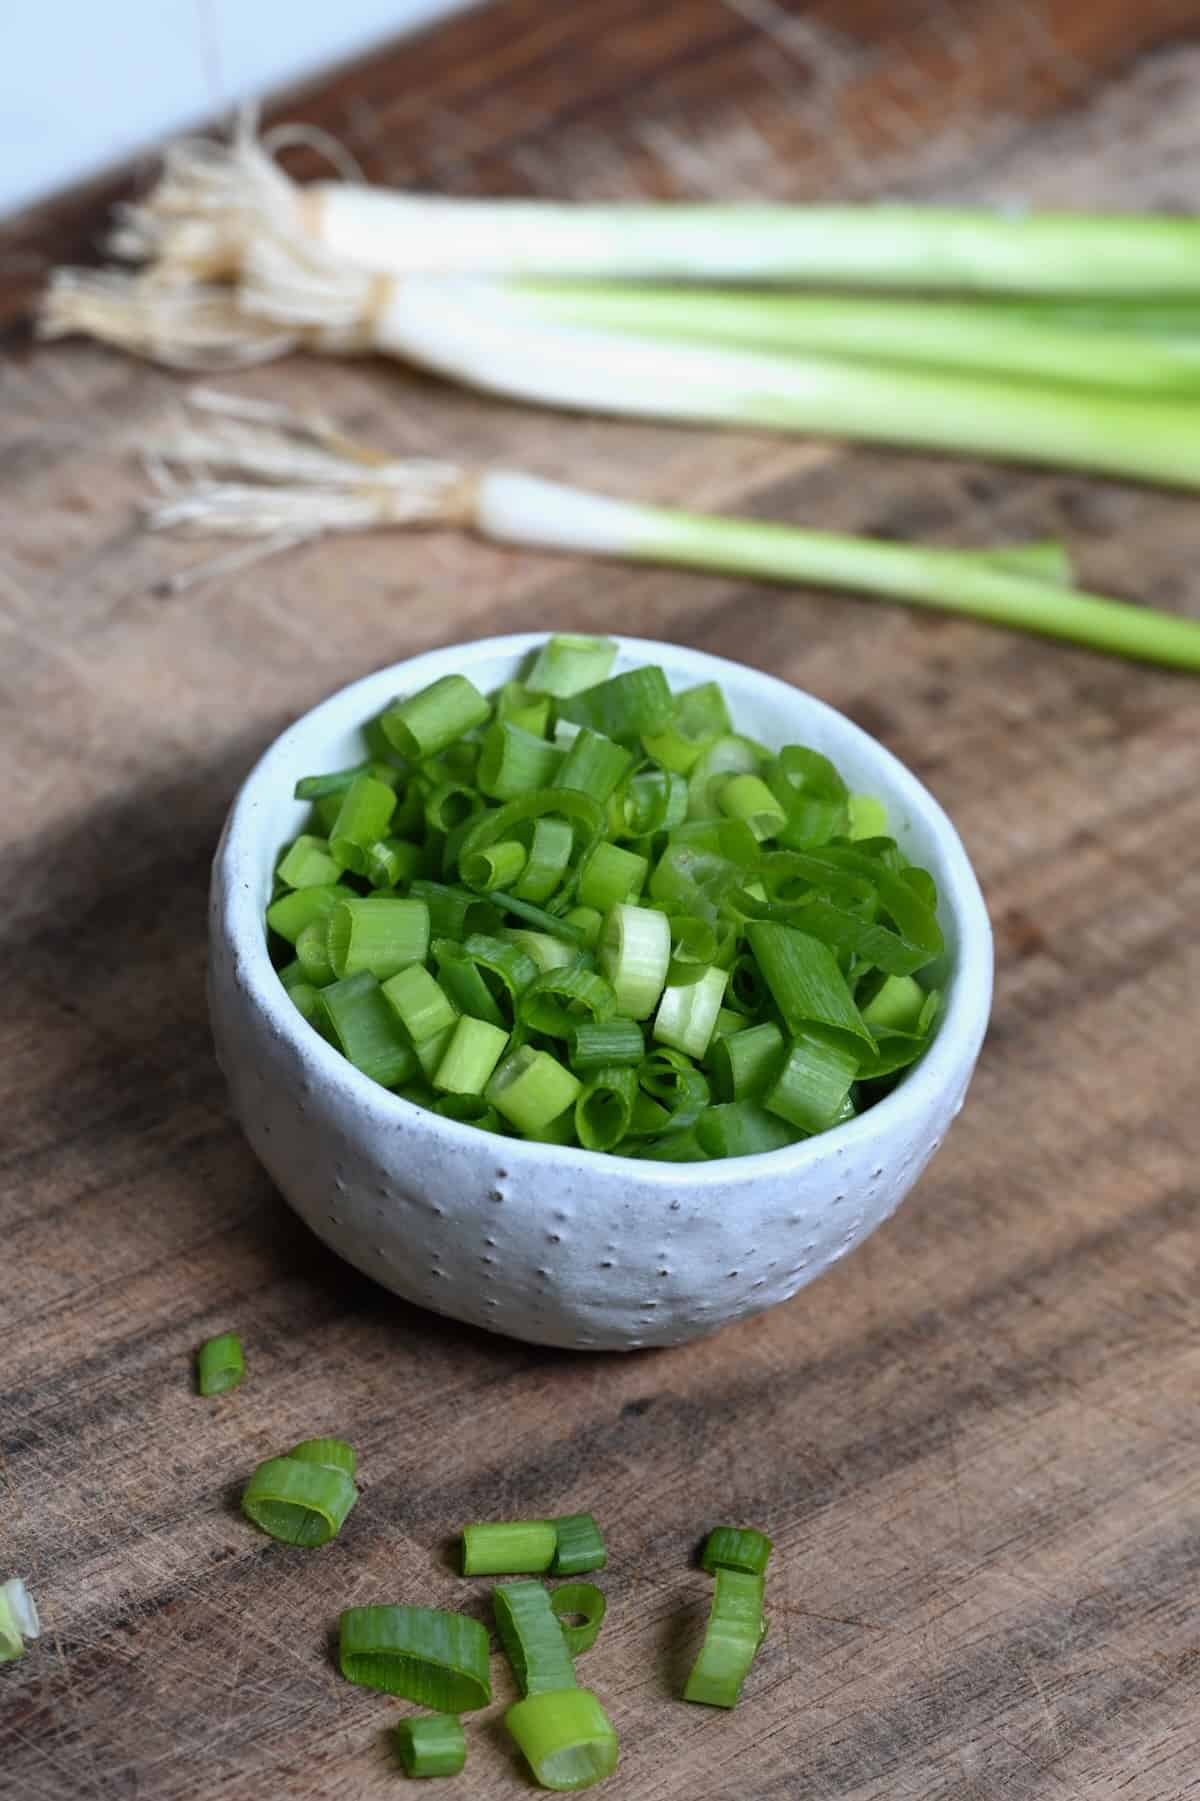 How To Cut Green Onions In 4 Easy Steps – Dalstrong